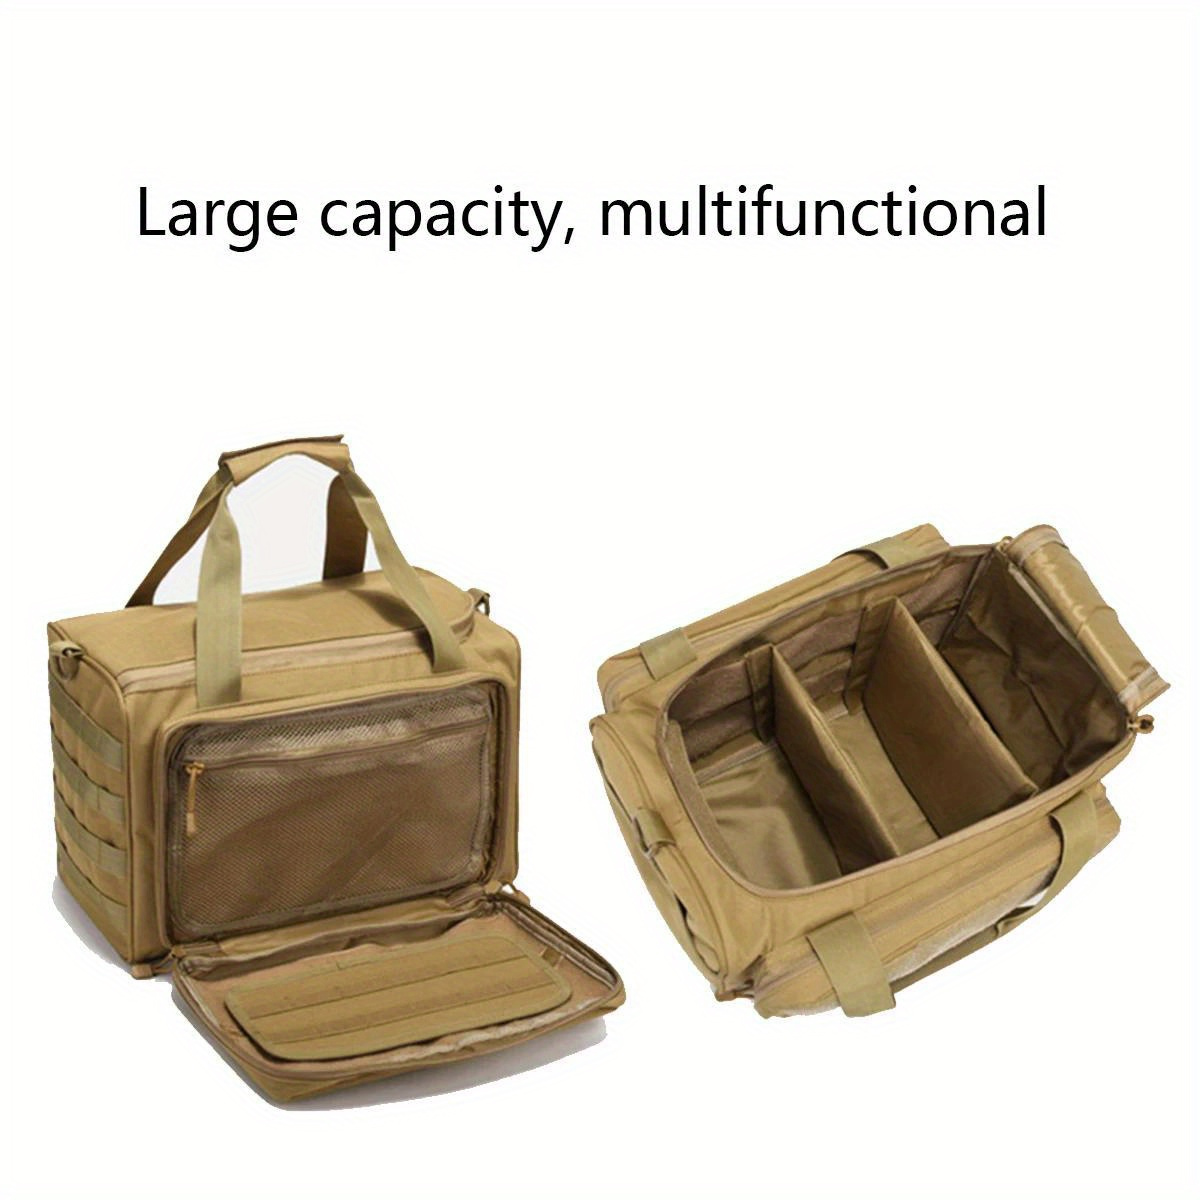 Multifunctional Training Bag, Molle System Waterproof Shoulder Bag, Accessories Tools Sling Bag - Click Image to Close